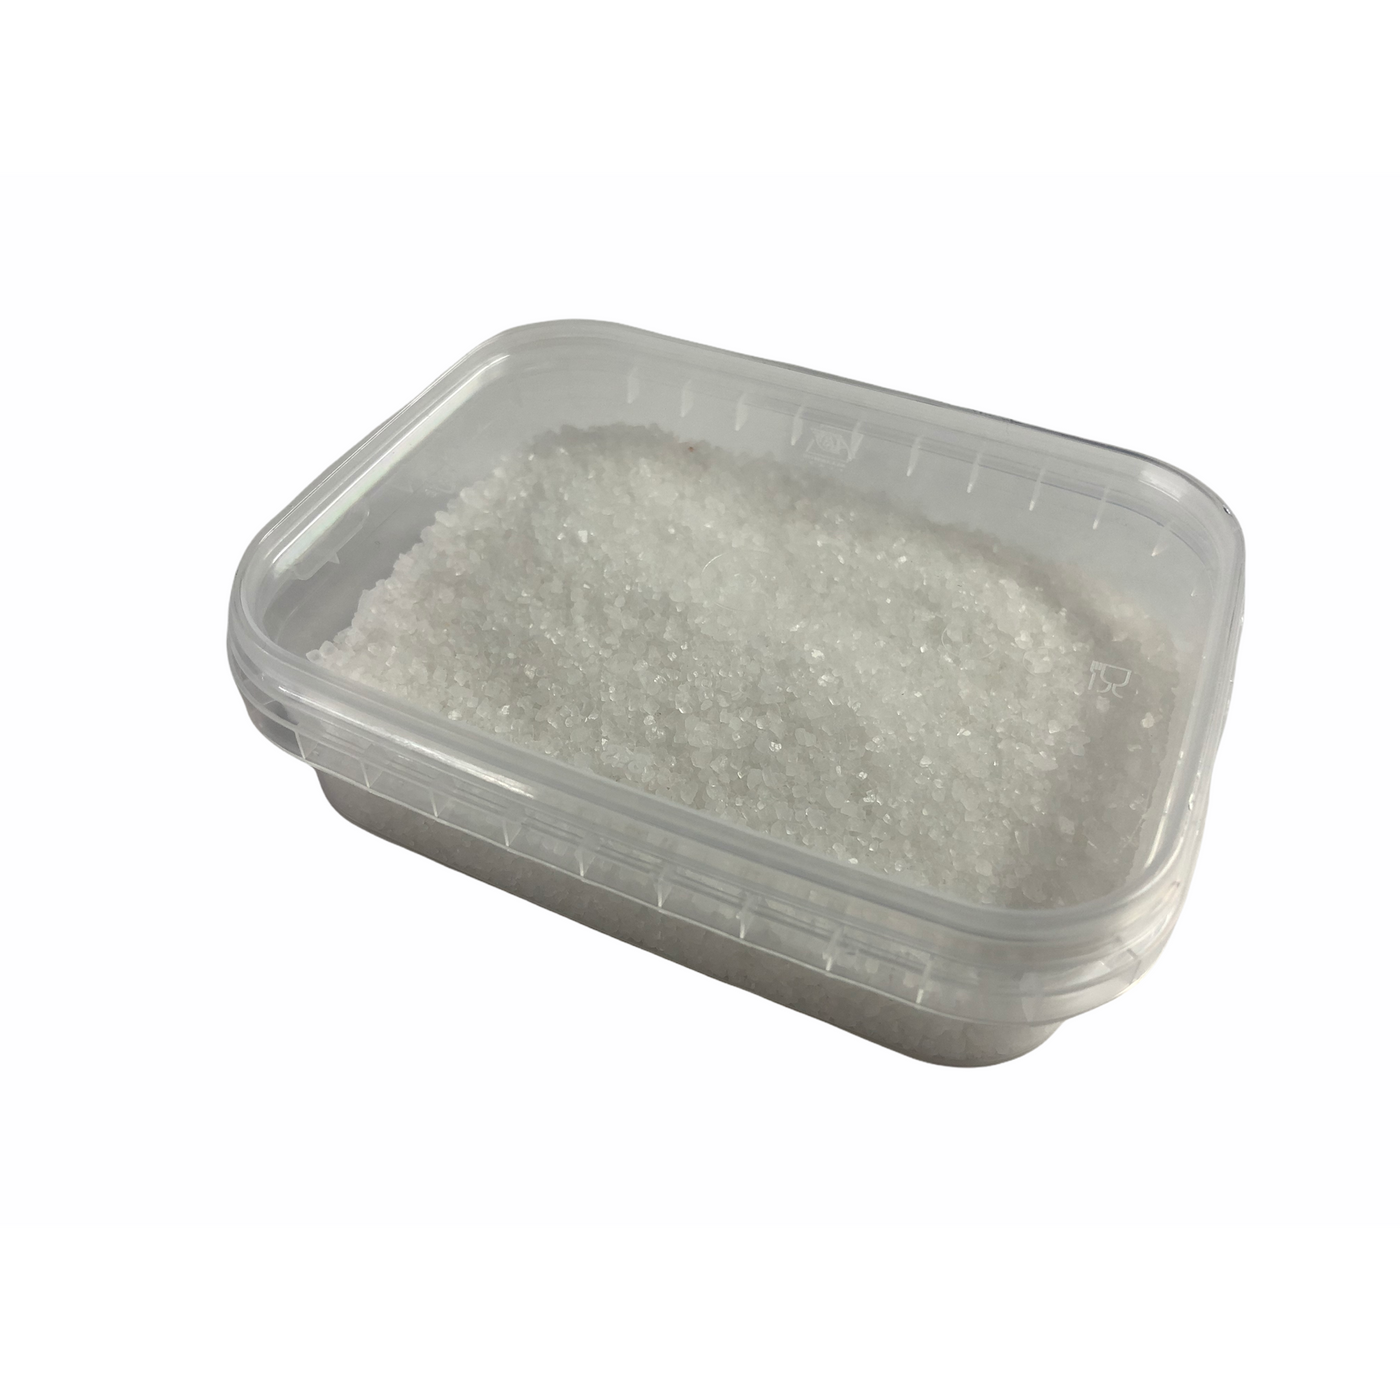 200ml Rectangular Tamper Evident Sizzler Granule Containers with Lids